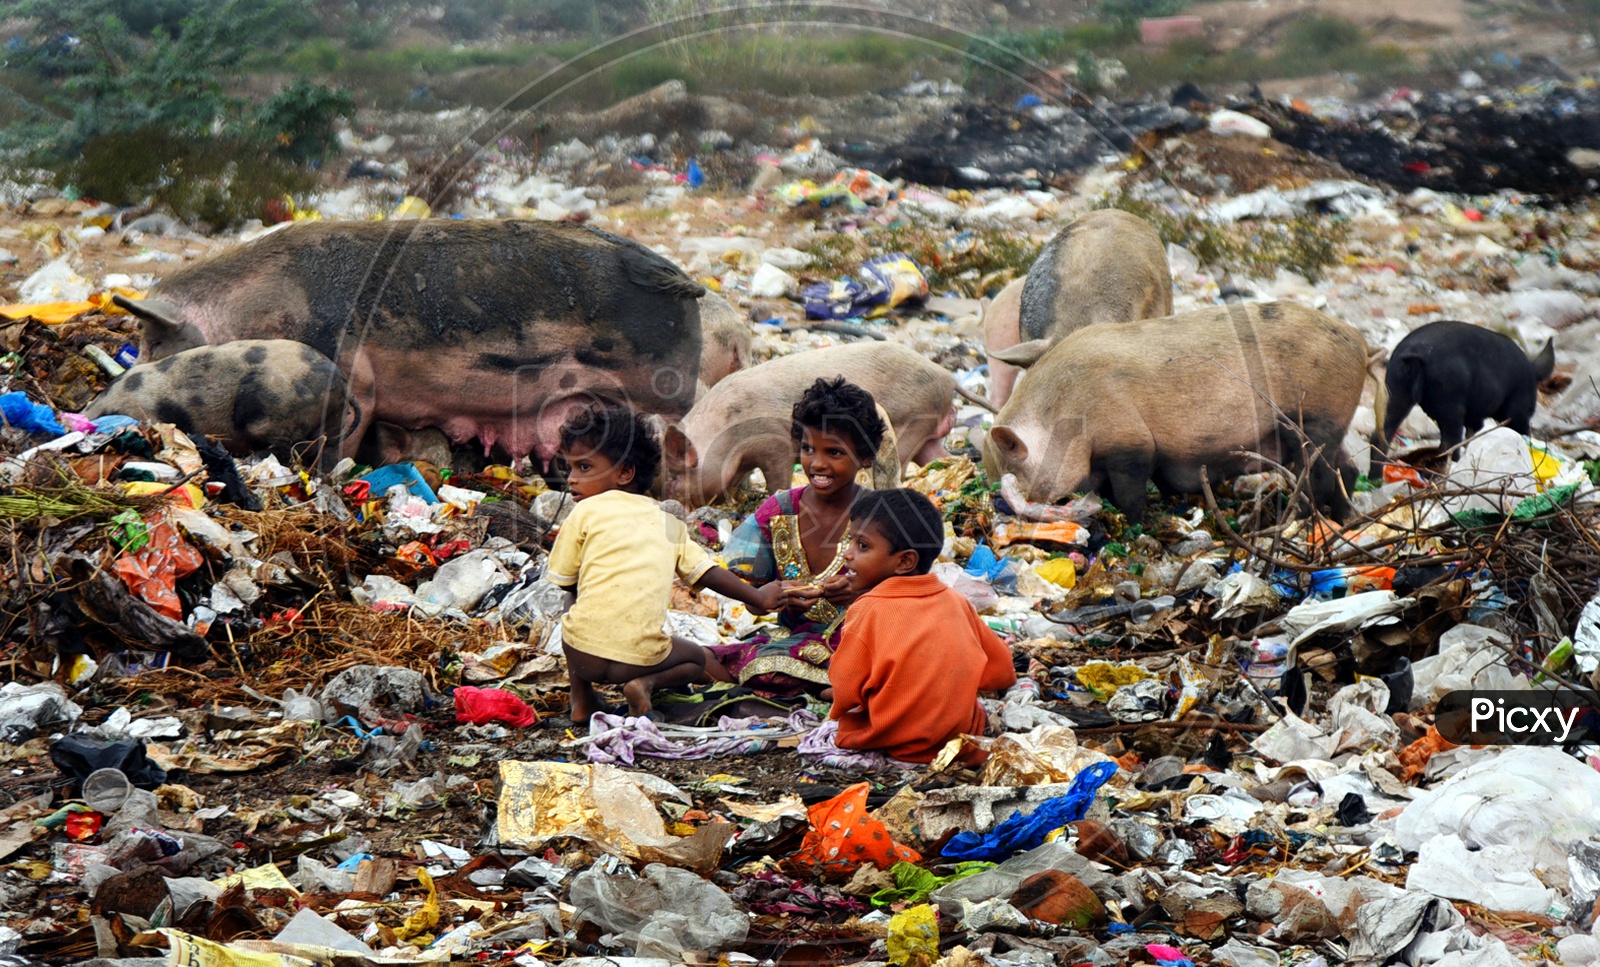 Children Playing In a Dump Yard With Pigs in the Surroundings